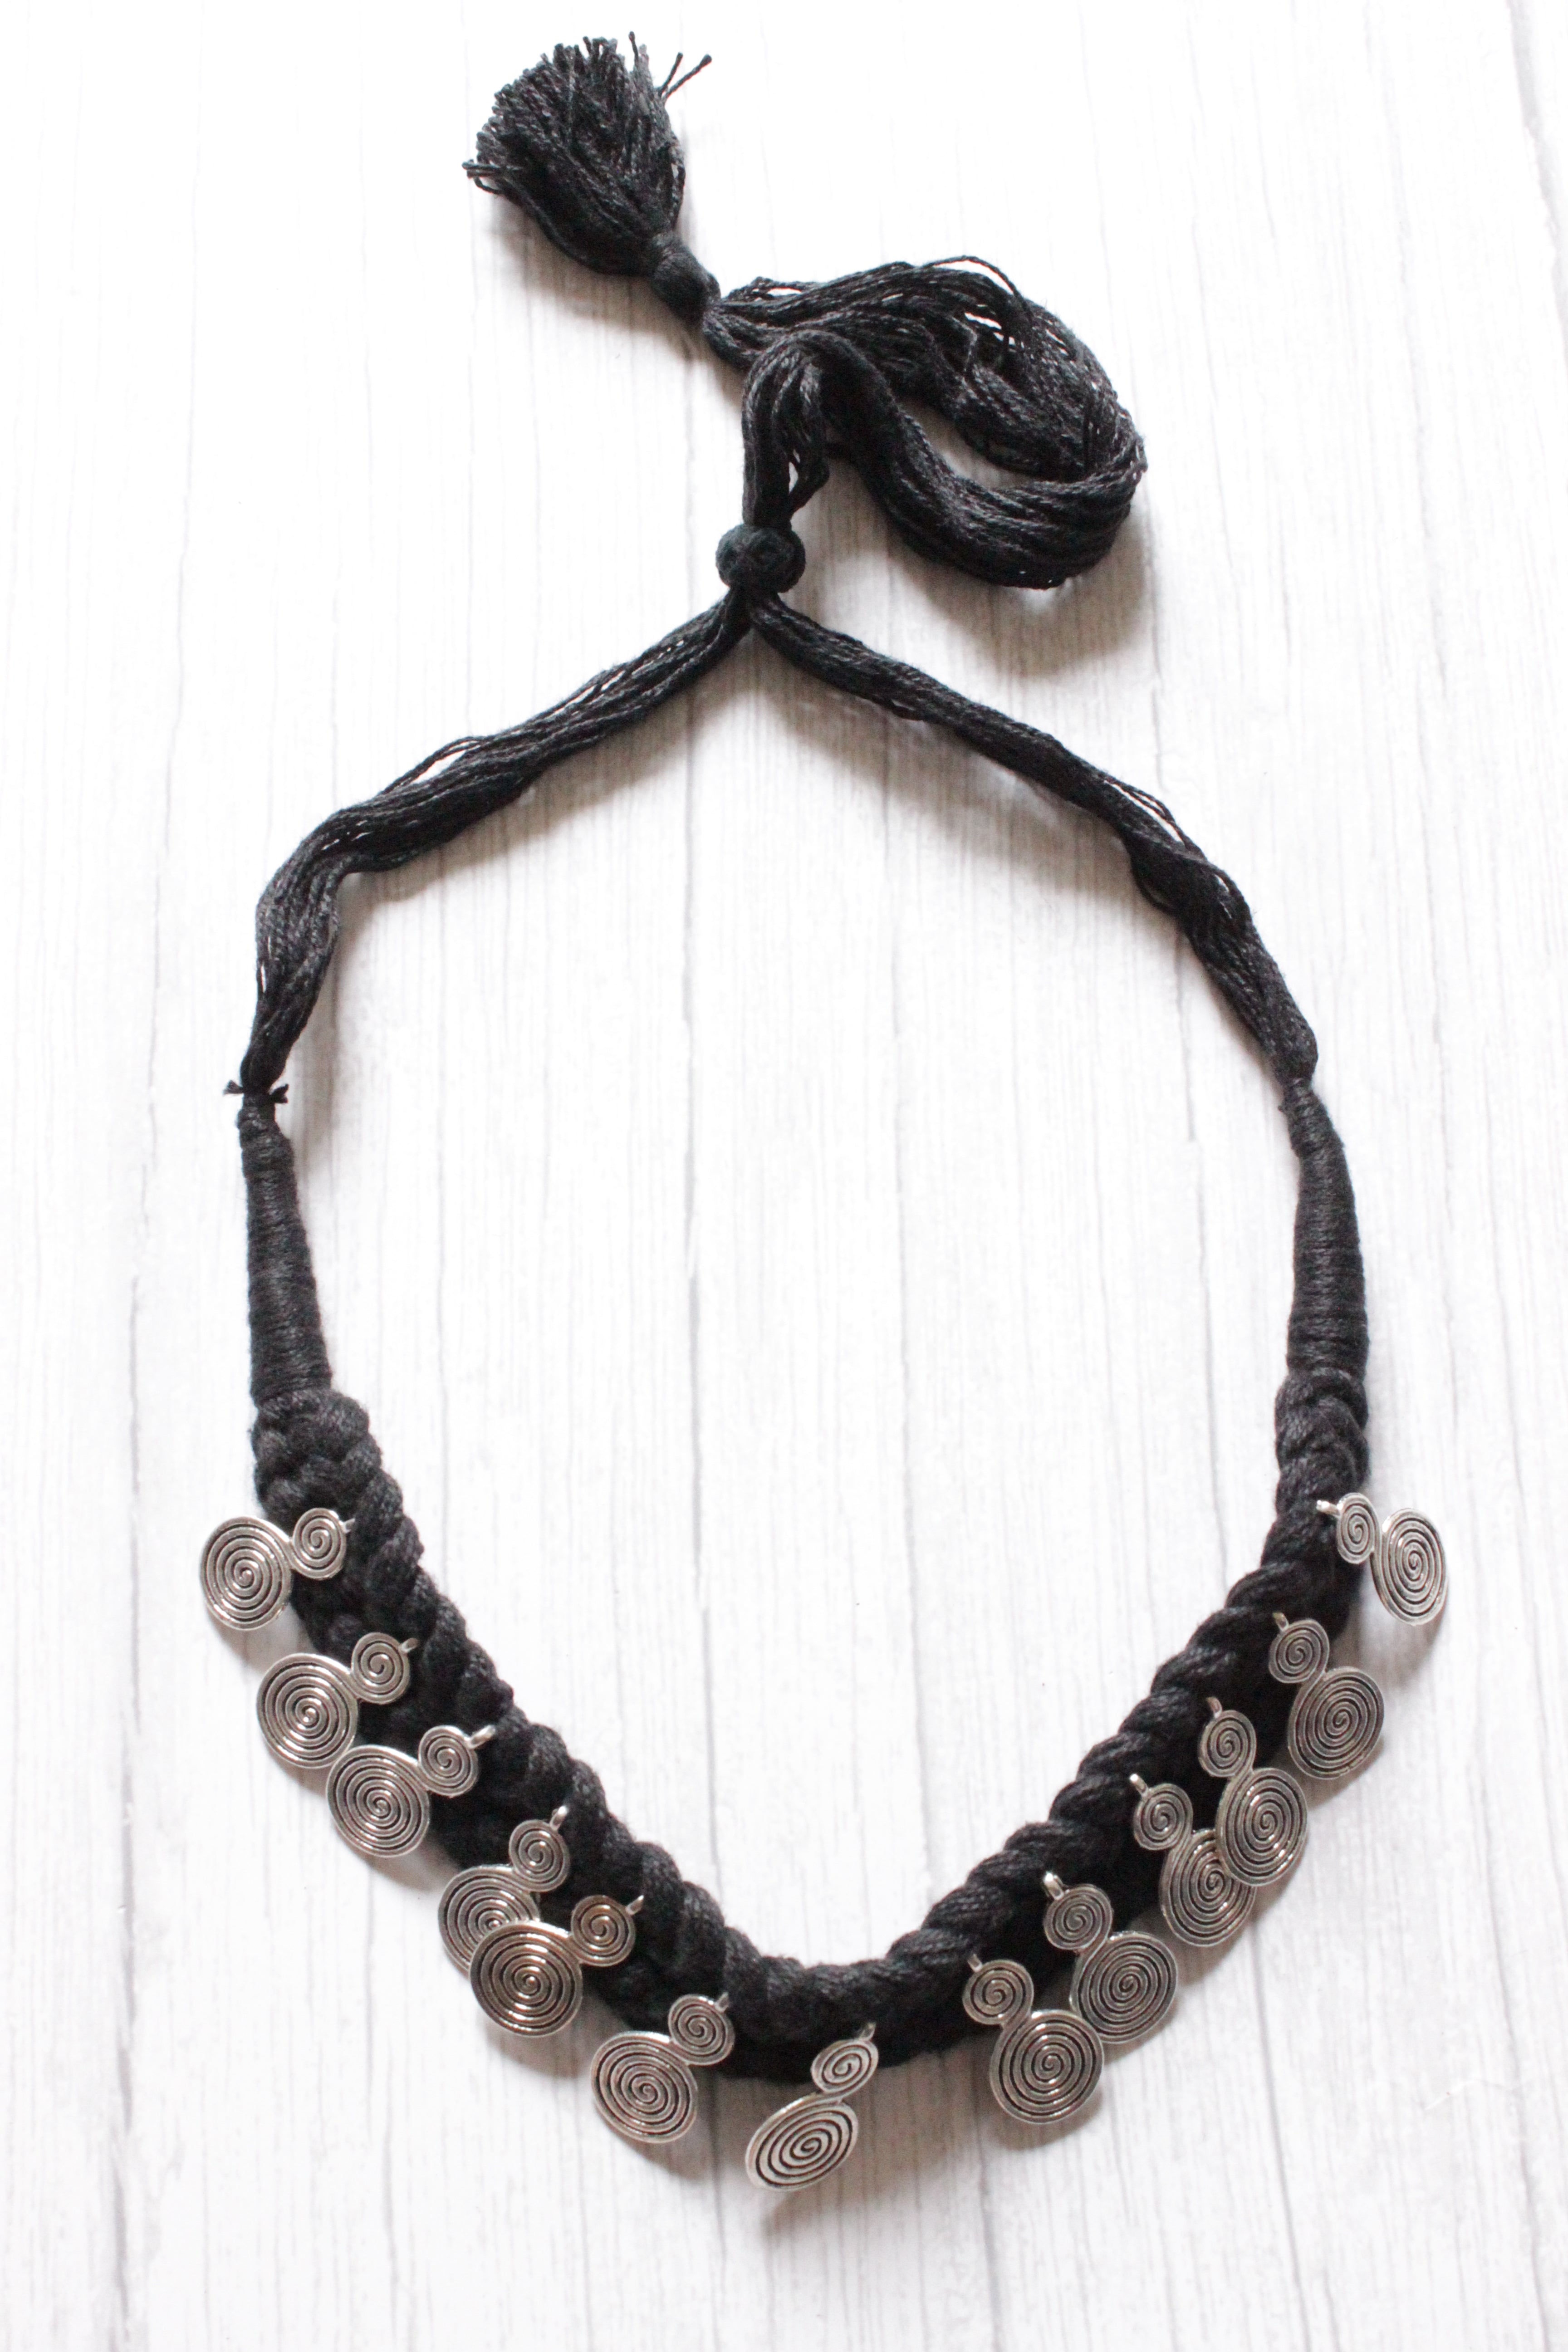 Metal Charms Embellished Black Braided Threads Necklace